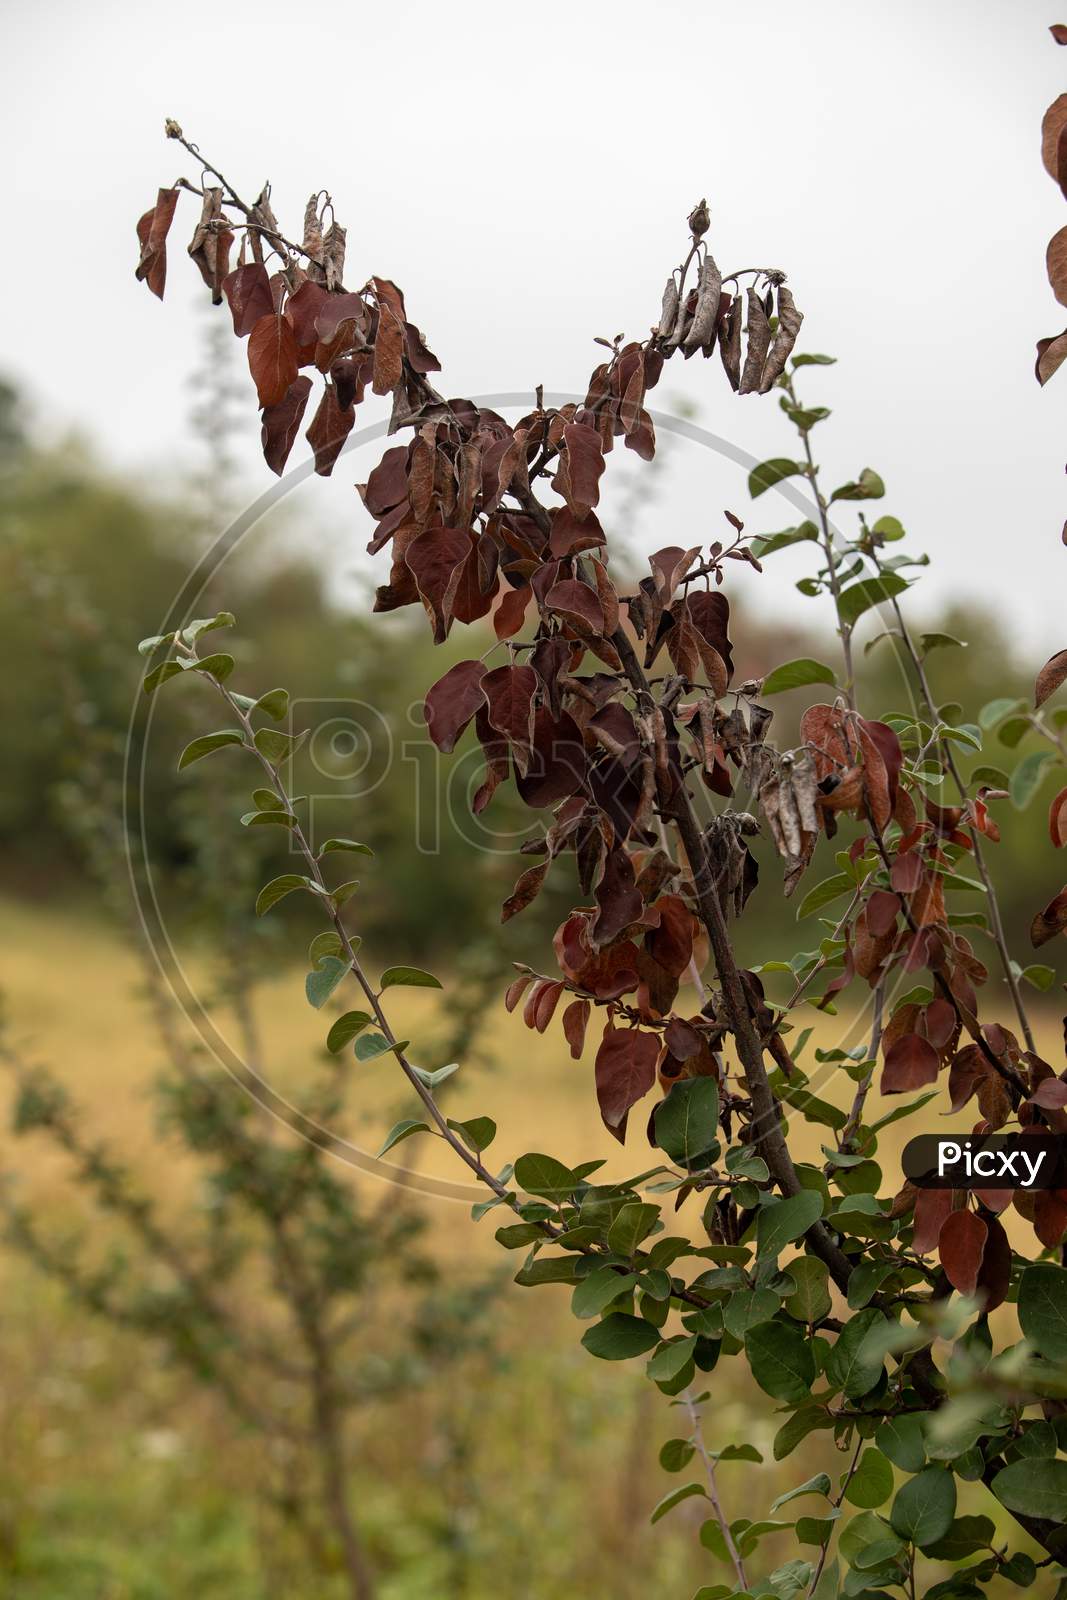 Fire Blight, Fireblight, Quince Apple And Pear Disease, Caused By Bacteria Erwinia Amylovora